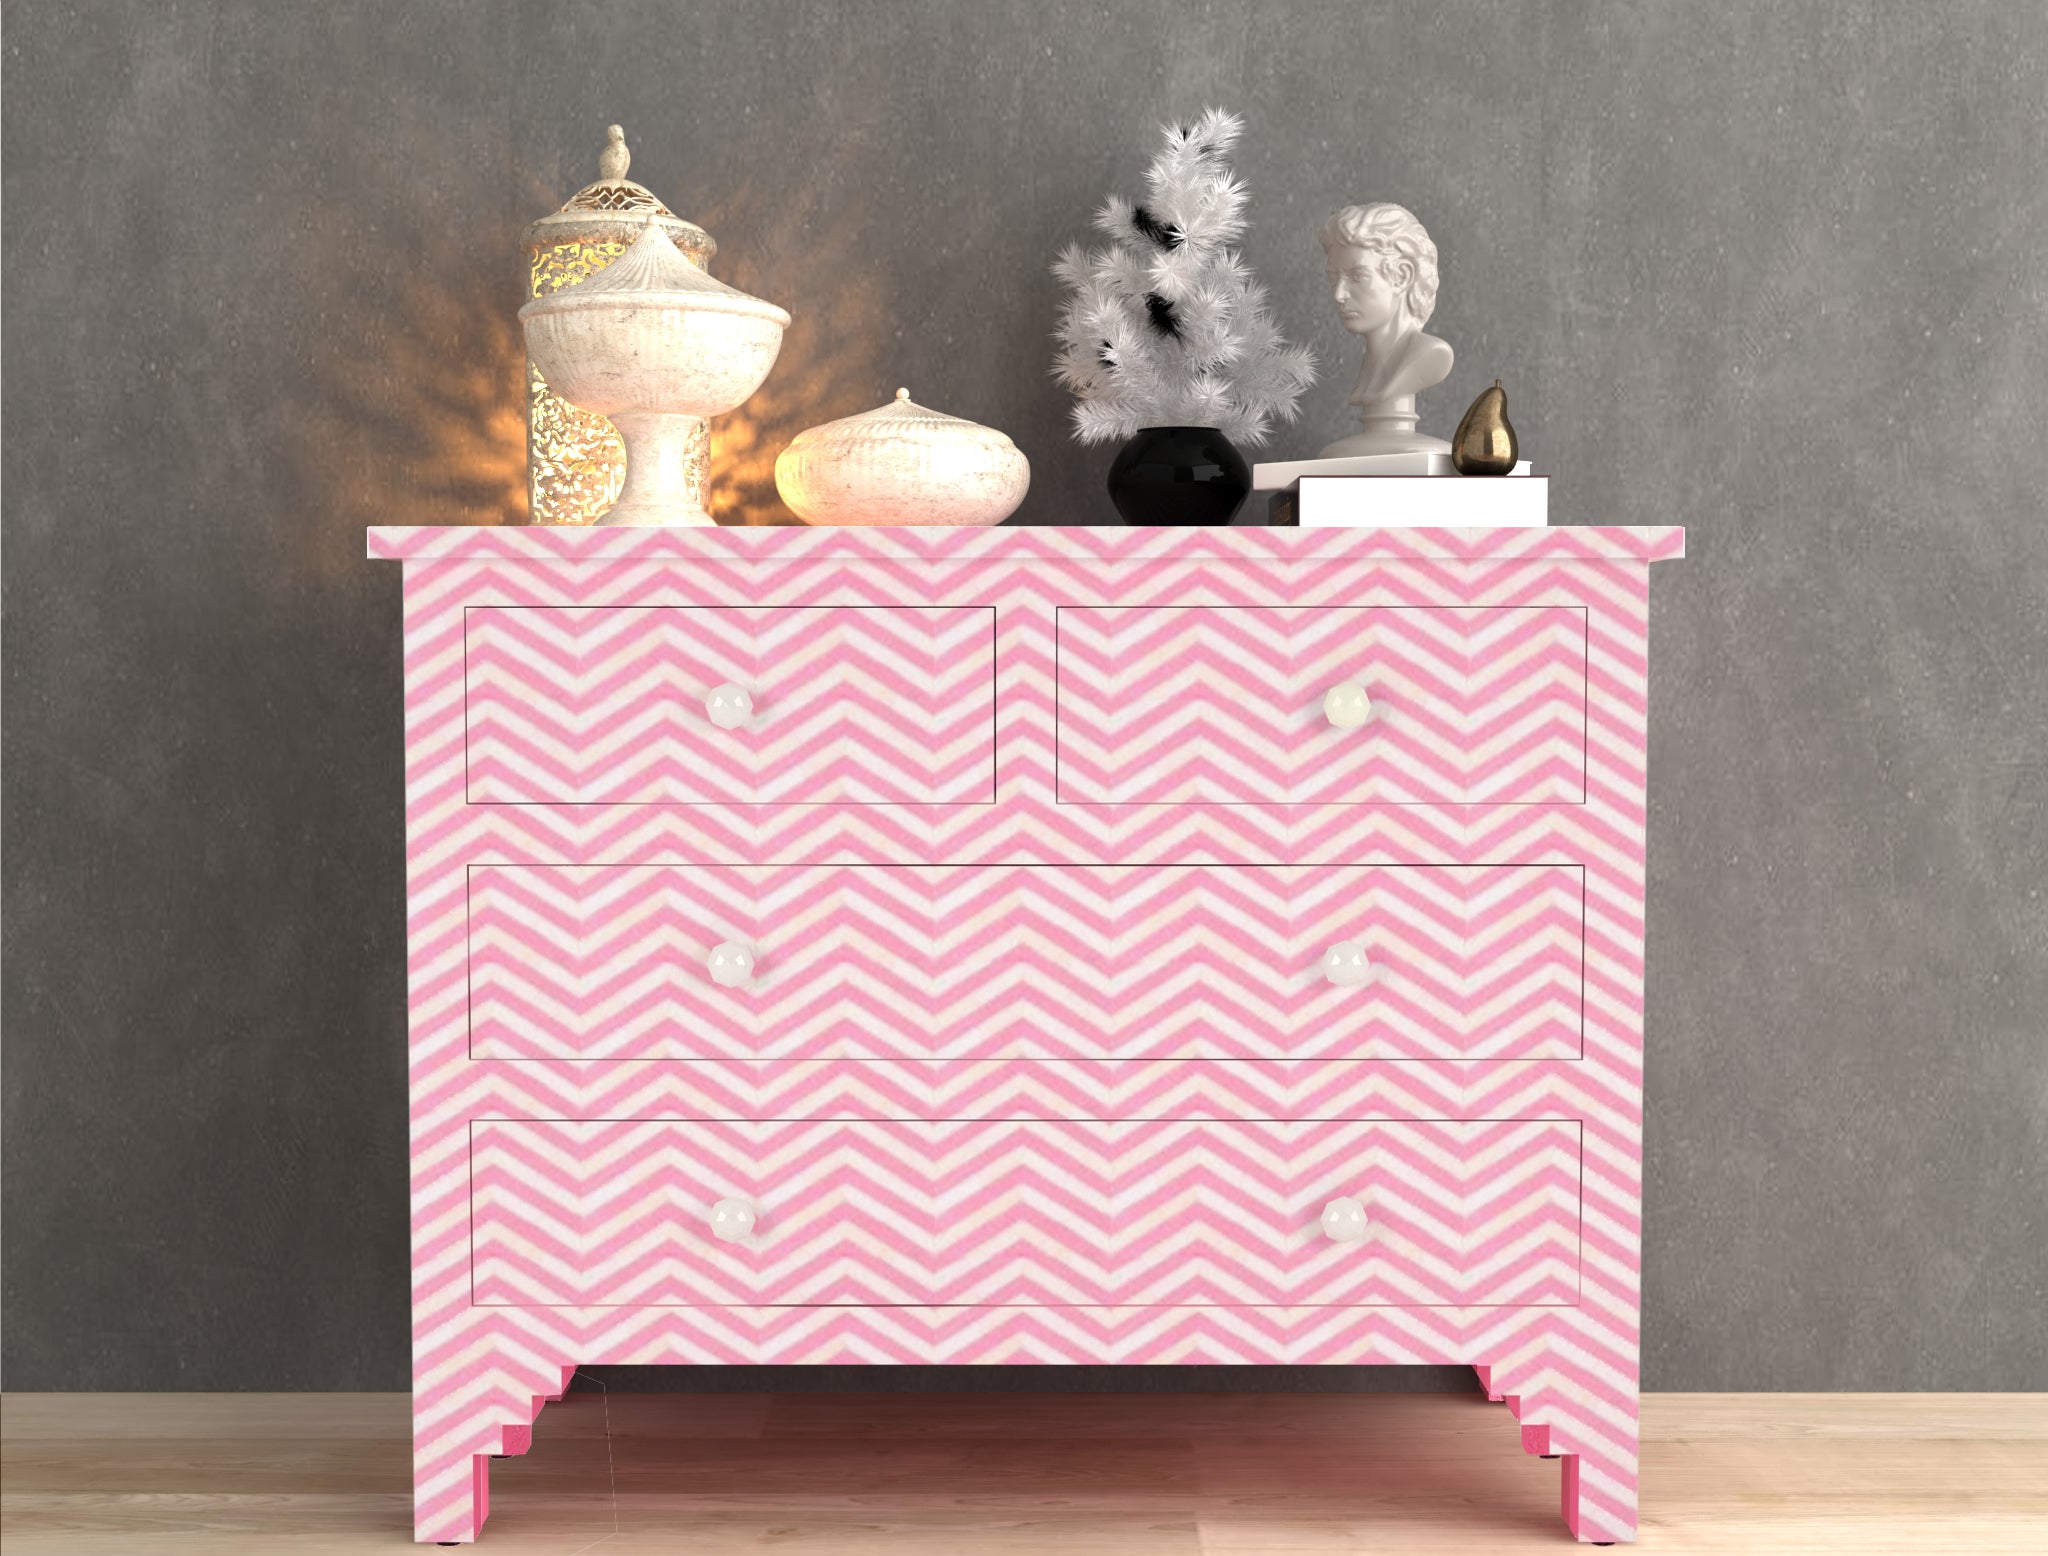 Isra Chest of Drawers - Pink Bone Inlay